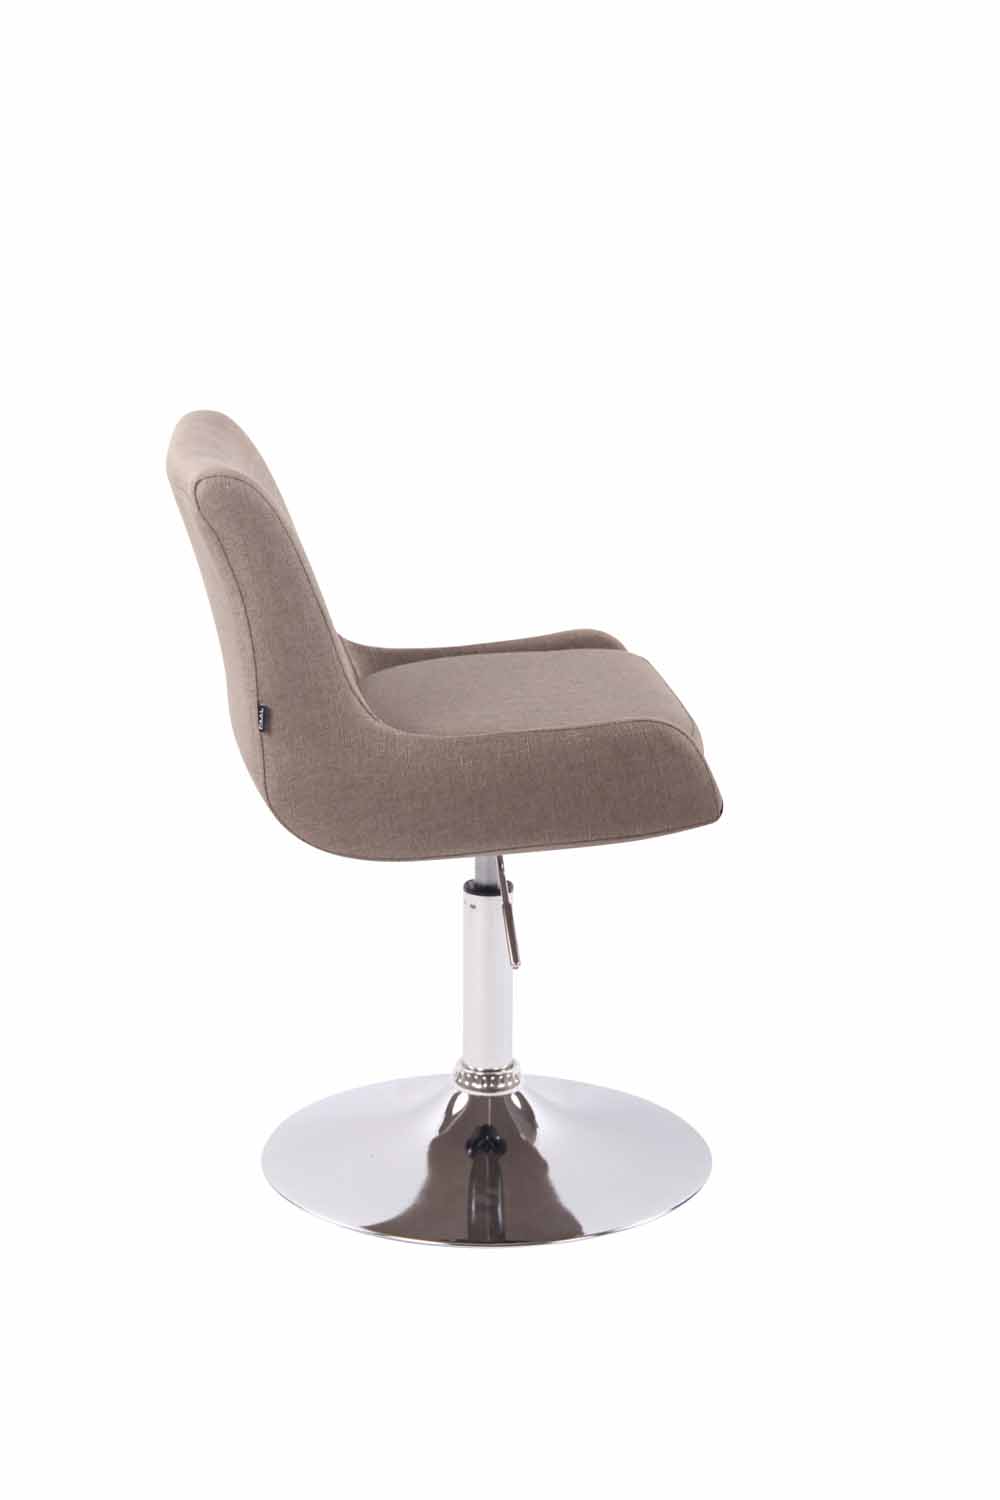 Lounger Club Stoff taupe